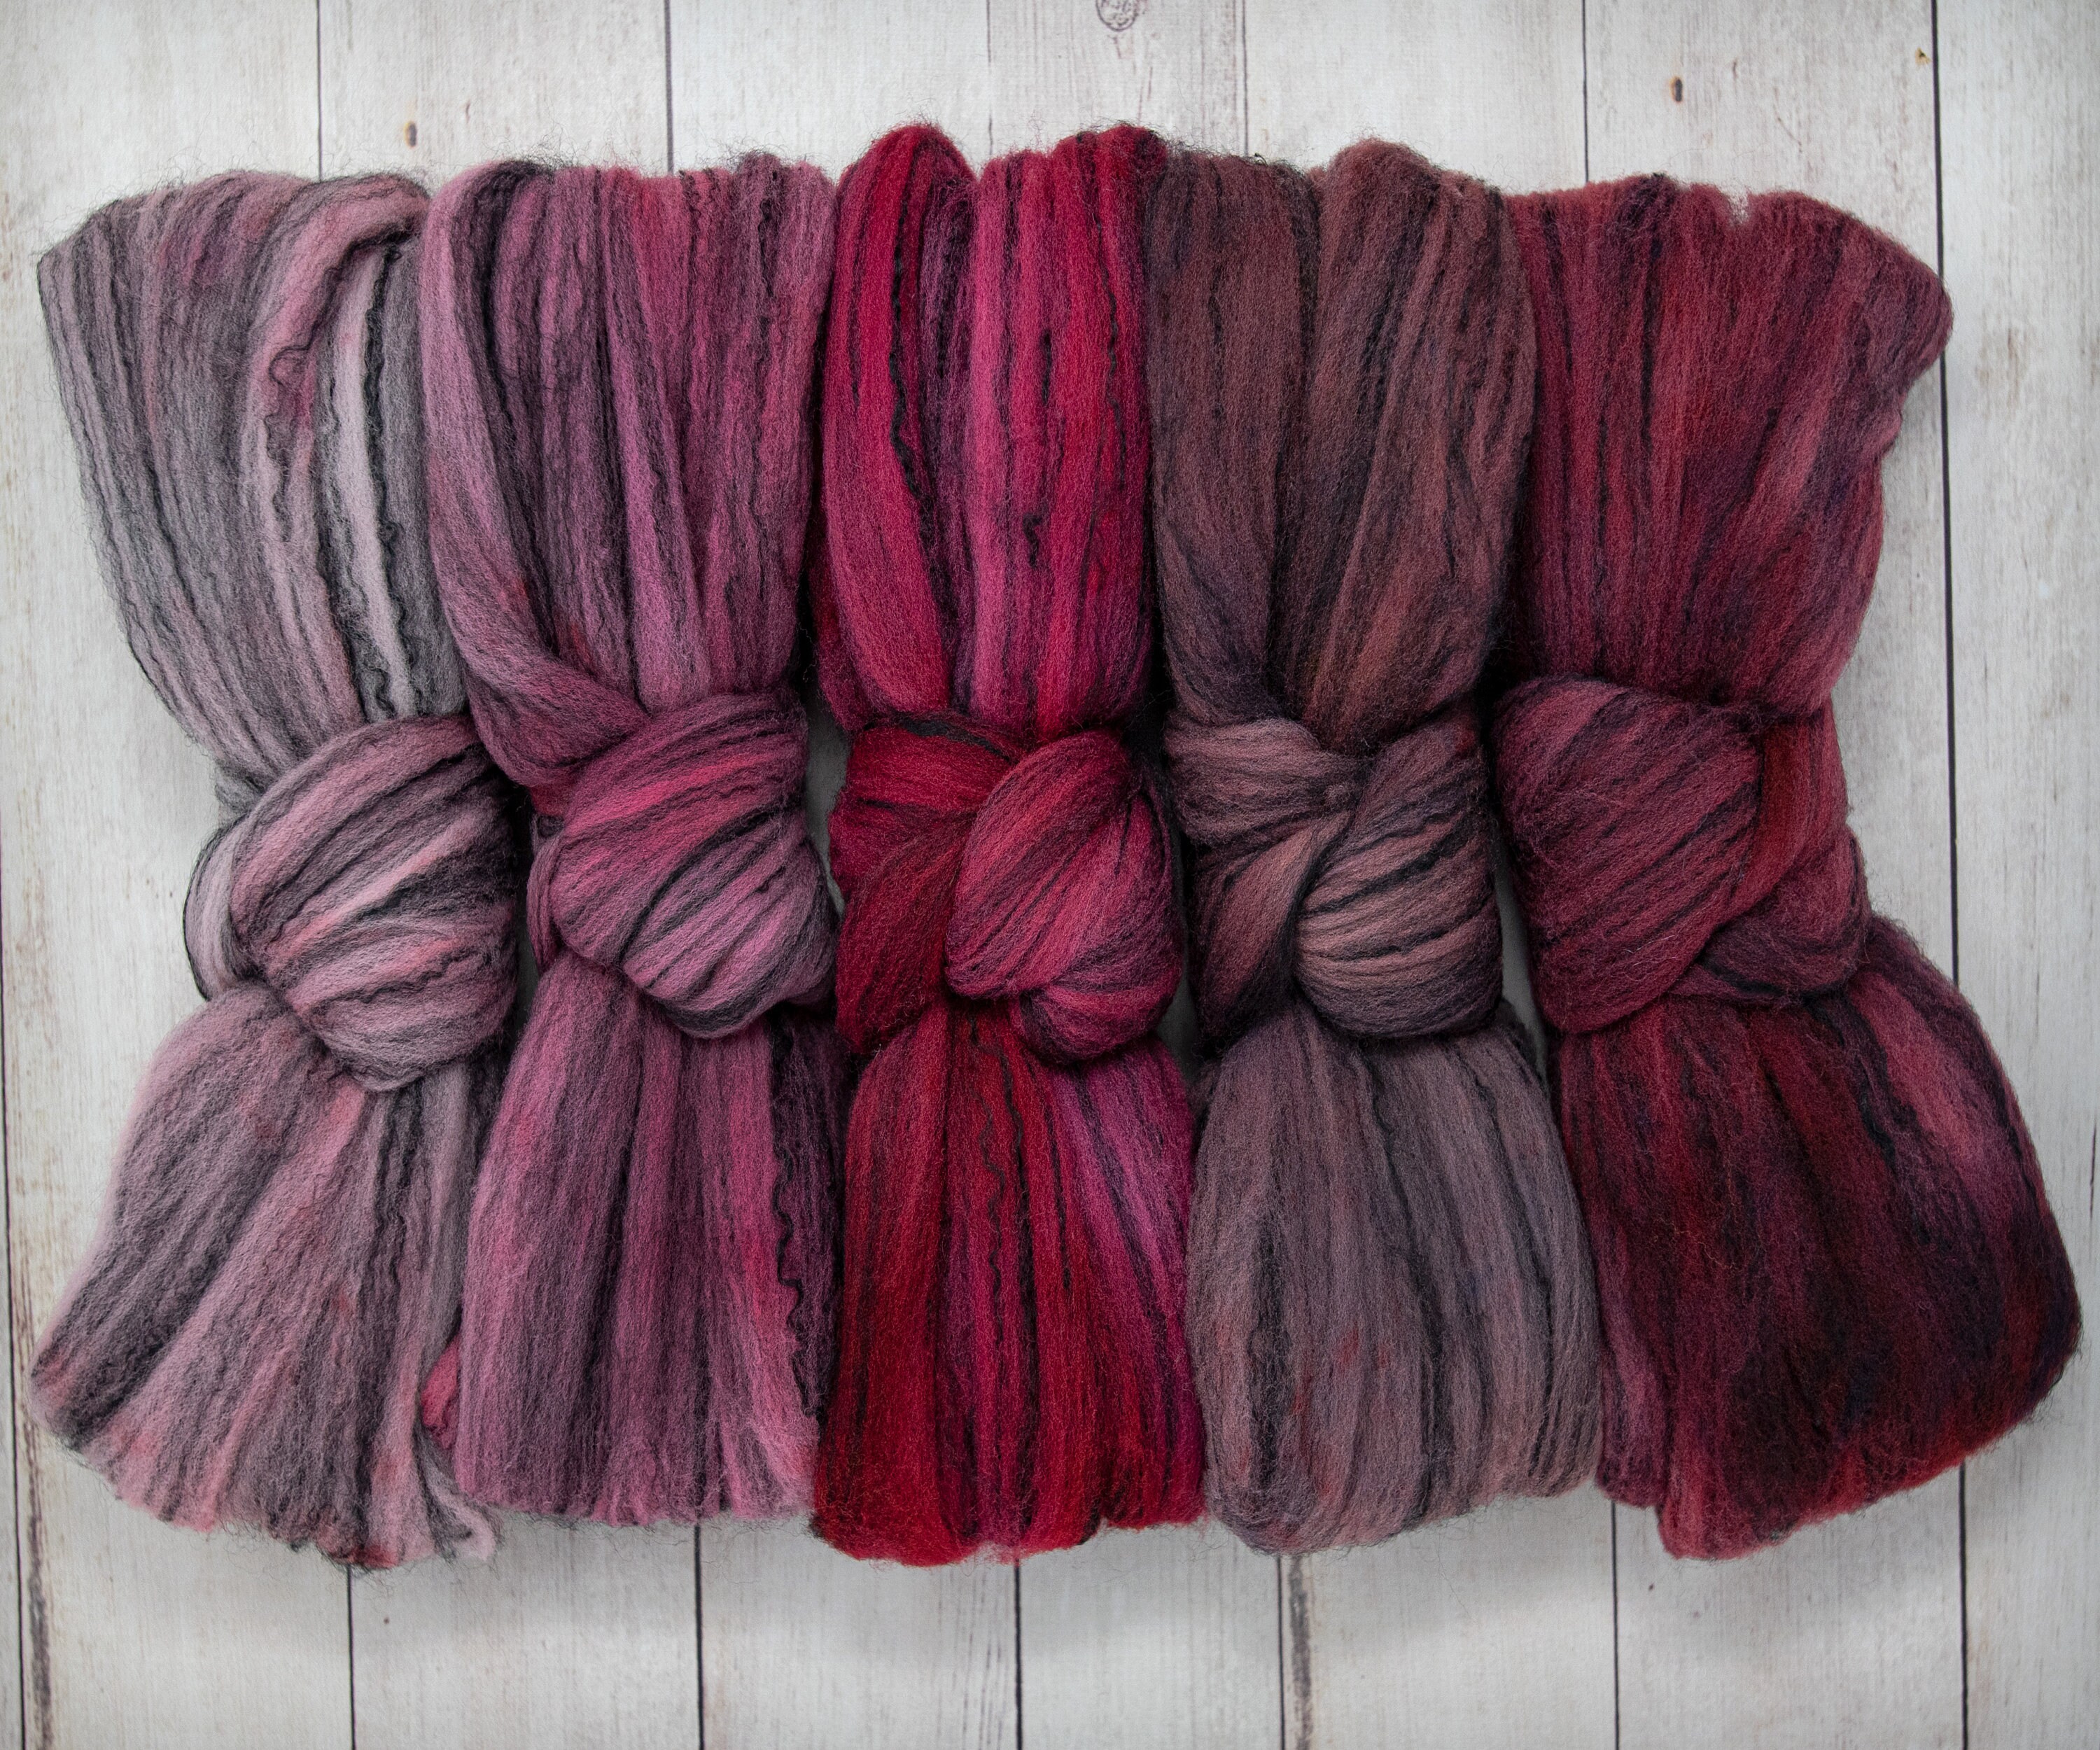 5 beautifully colored Mini Skeins DISCOUNT PACK Red Fire Blending and Weaving Super Soft Wool Top Roving drafted for Hand Spinning Felting HAND DYED Merino Tencel SPINNING FIBER 